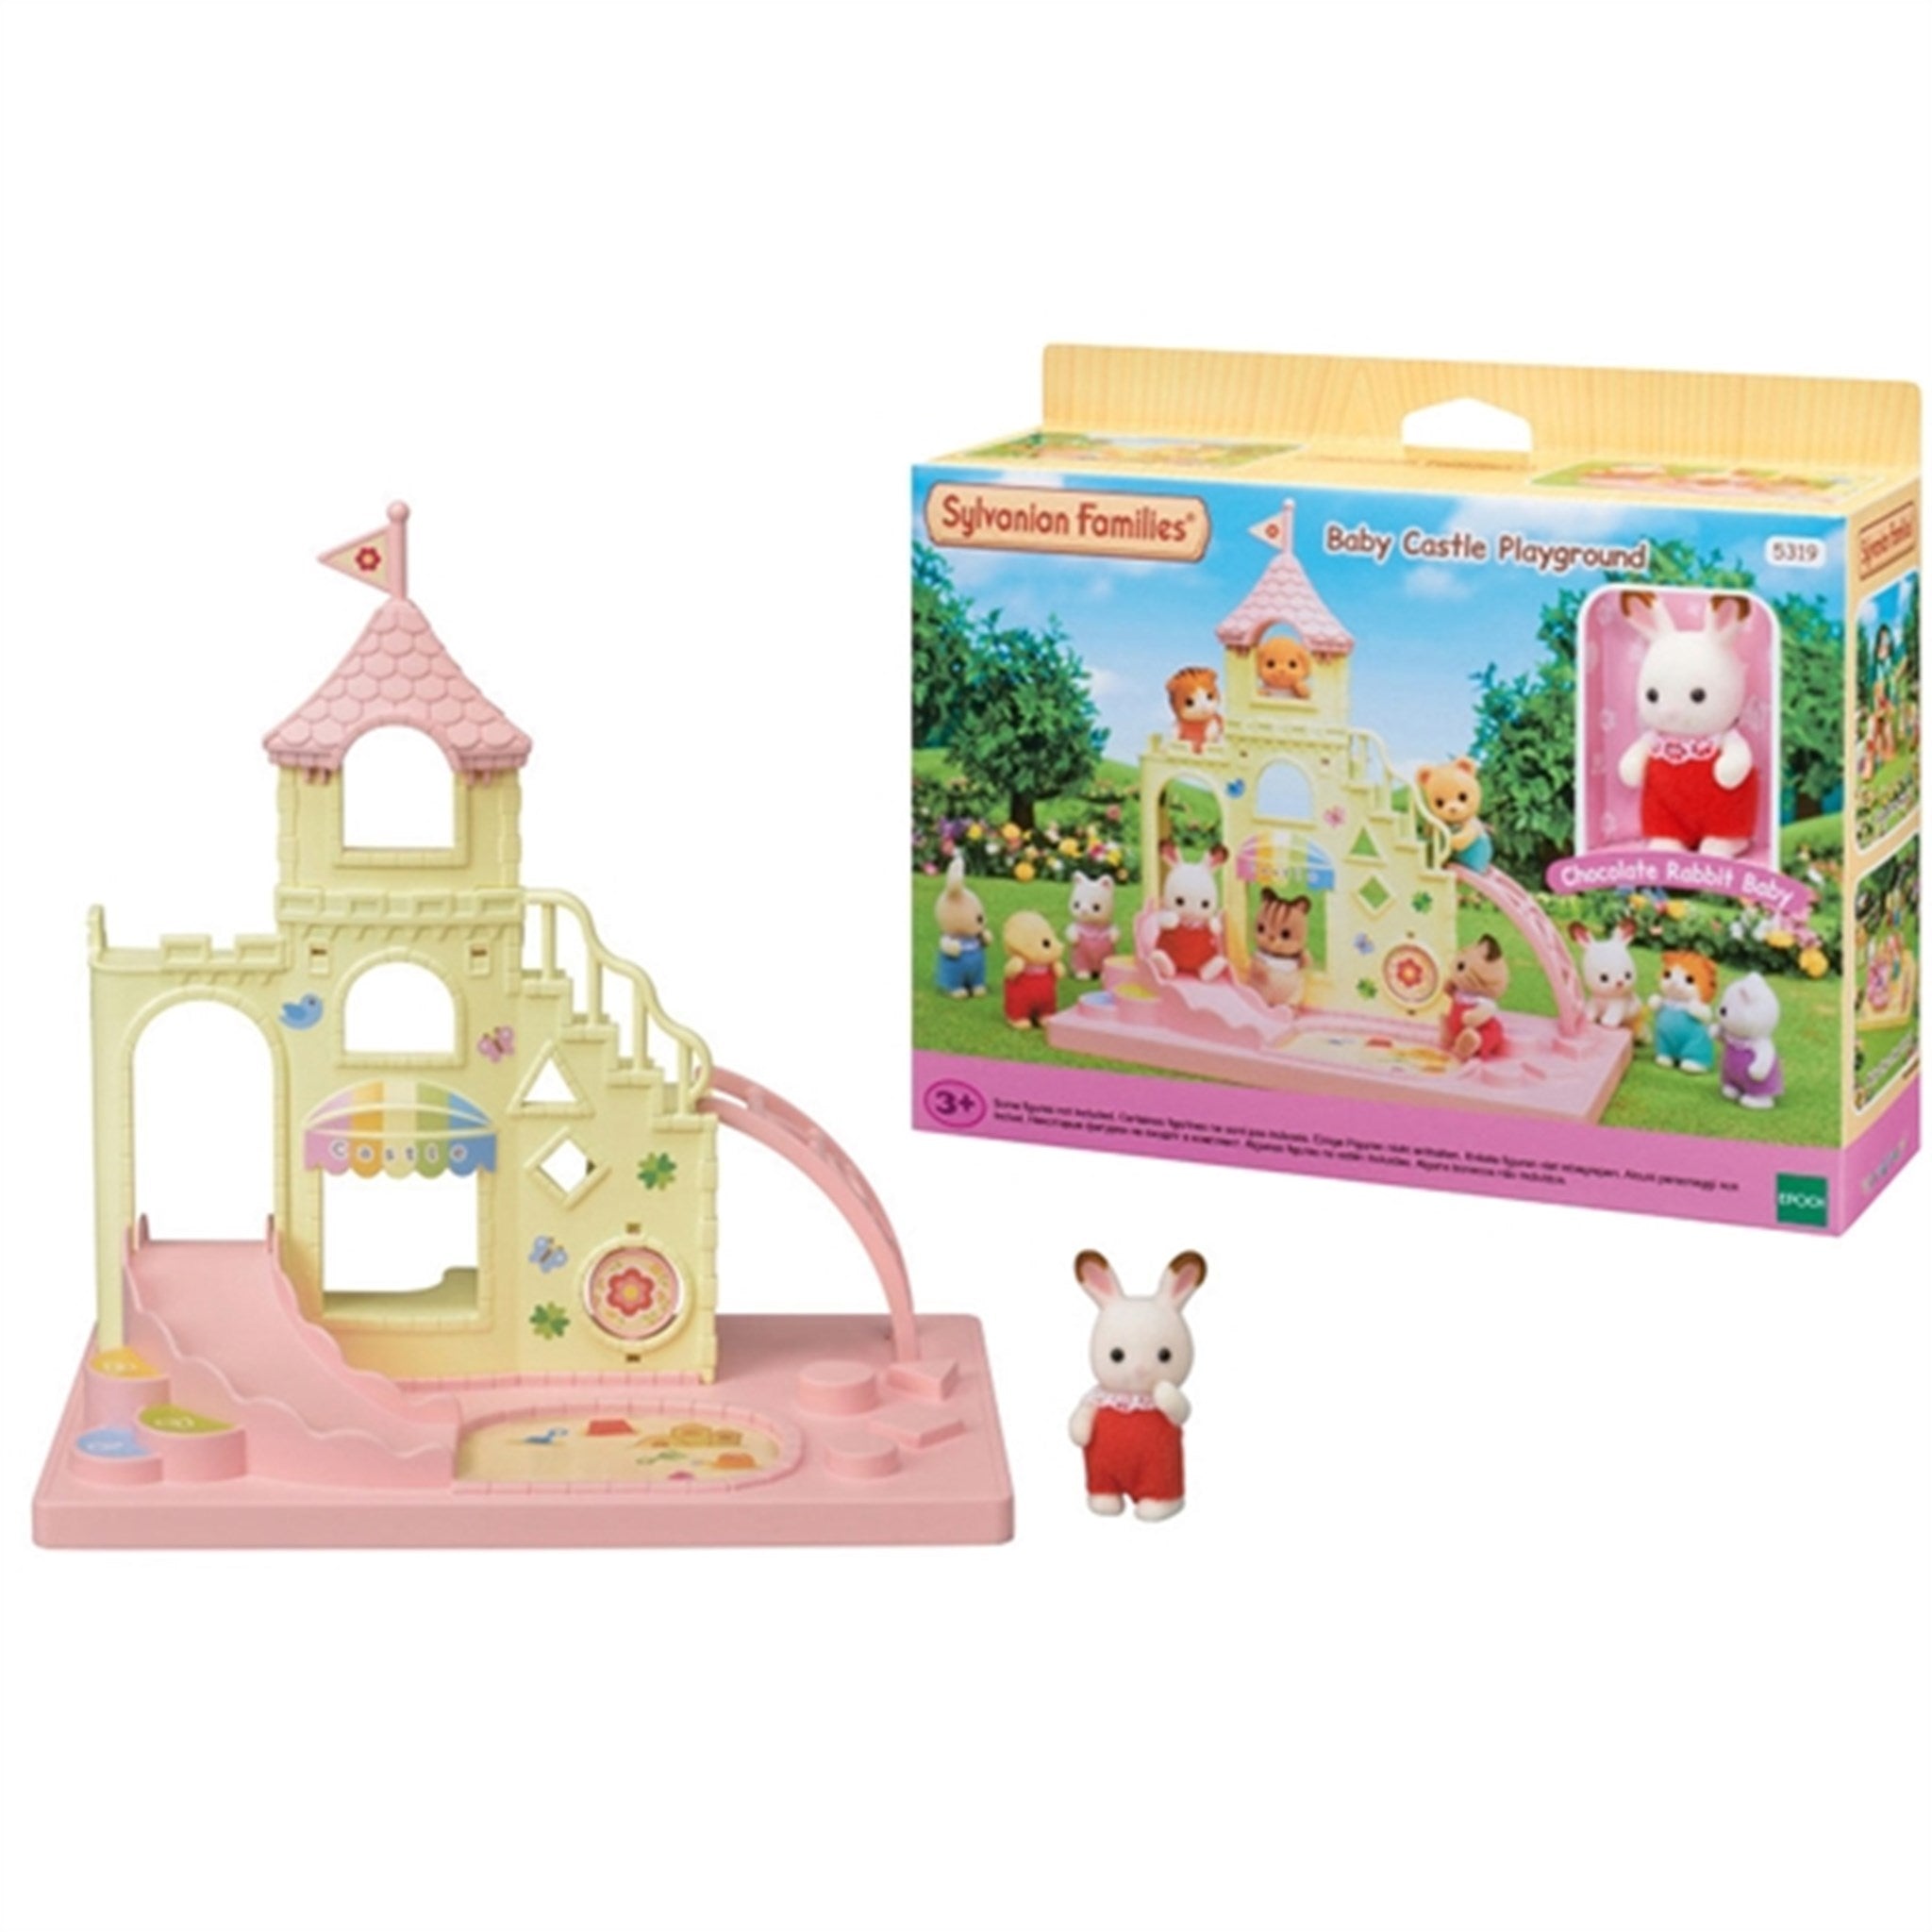 Sylvanian Families® Baby Castle Playground 7